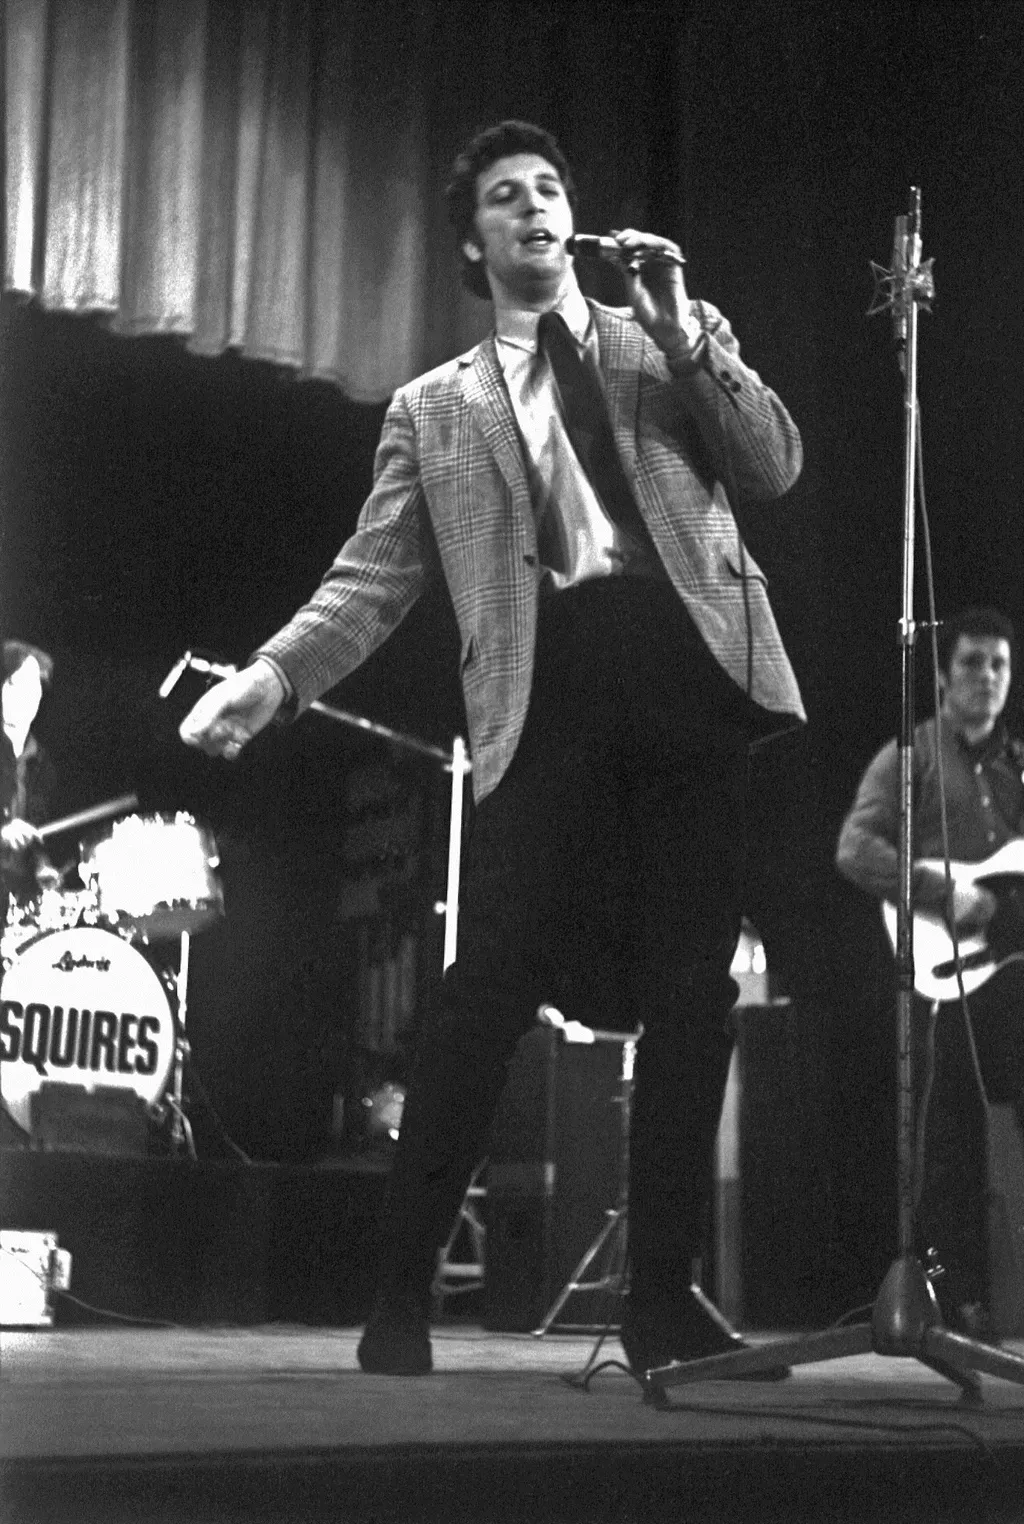 Tom Jones, 1965 Photograph Archive 20th century 1960s Sixties France MUSIC CONCERT Stage Micro SUIT TIE 